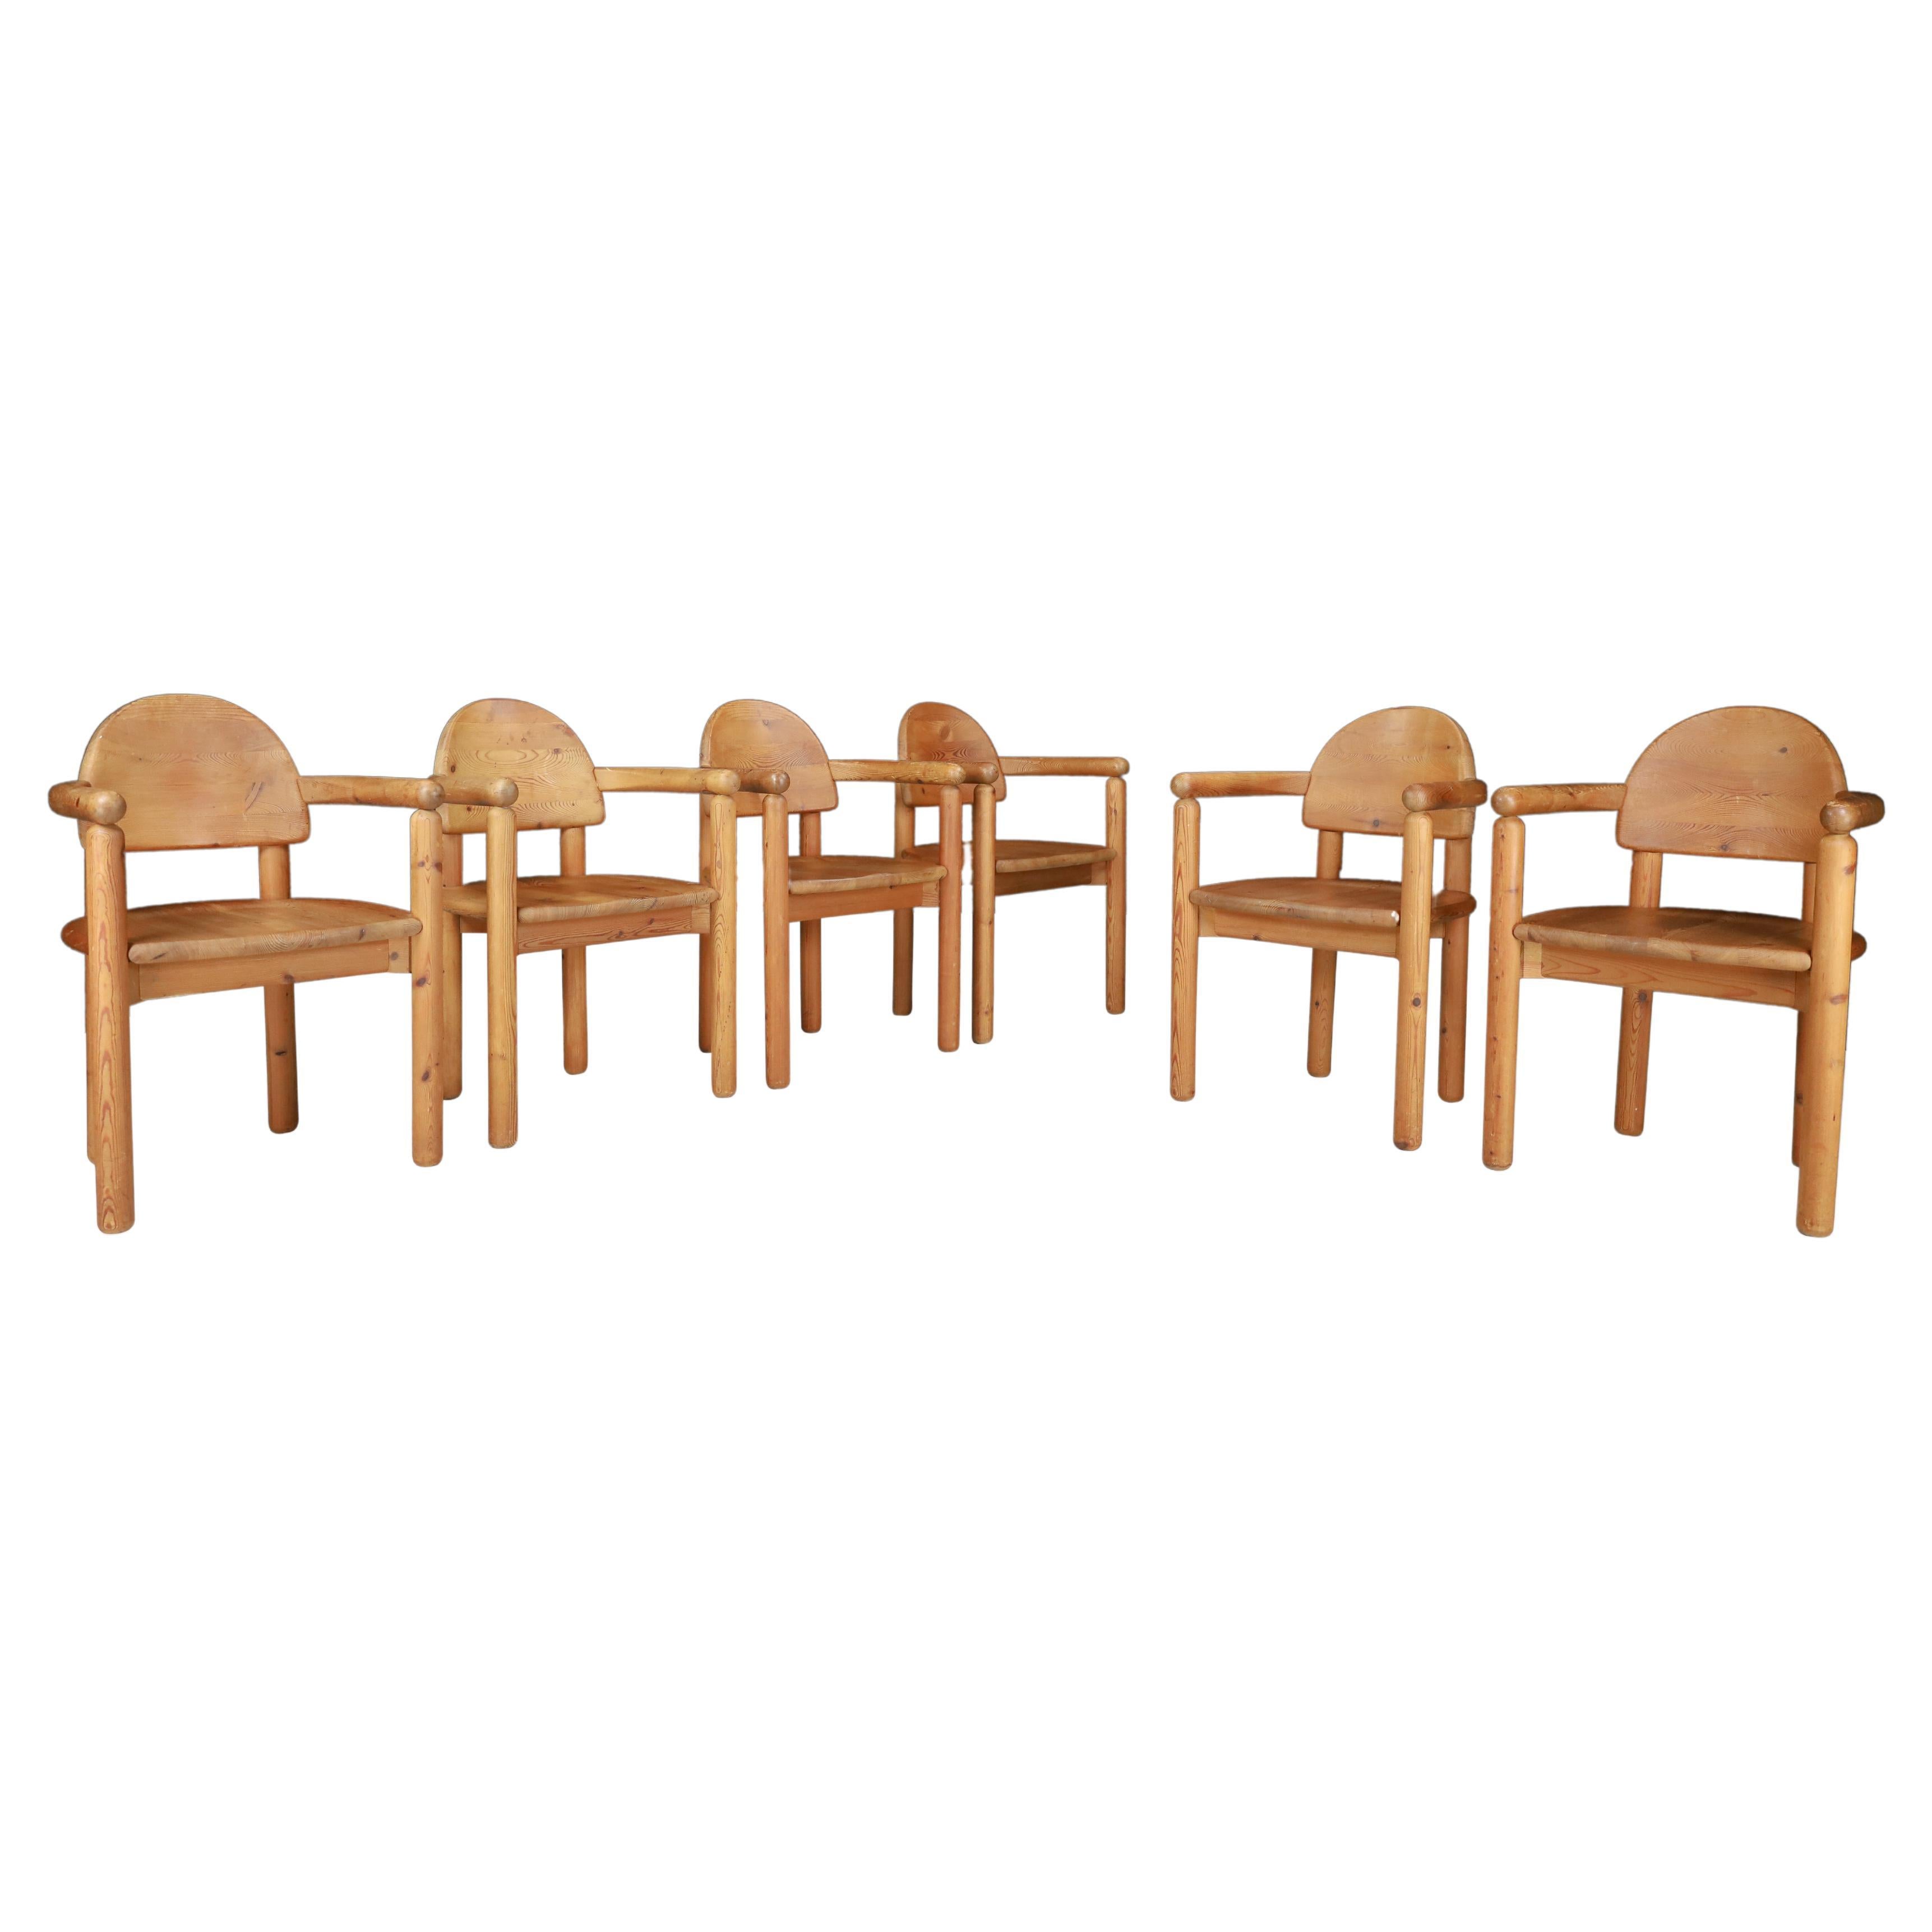 Rainer Daumiller Dining Room Chairs in Solid Pine, 1970s, Denmark Set/6